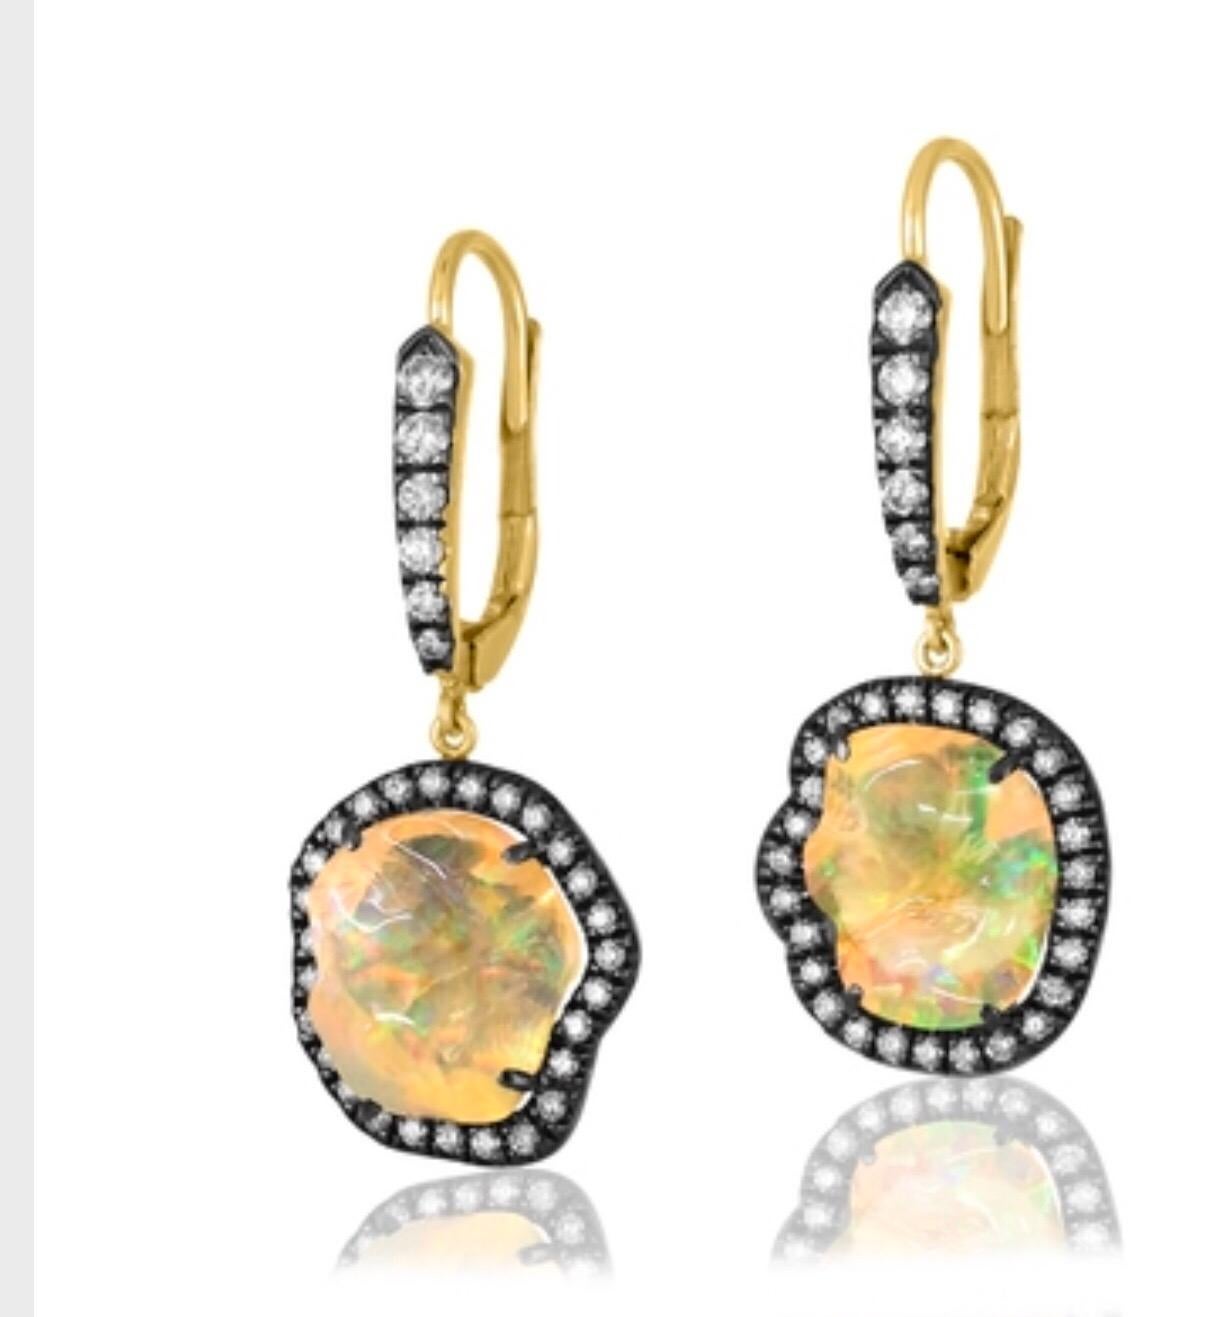 Contemporary Fabulous Freeform Mexican Opal Earrings with Diamond Accent in 18 Karat Gold